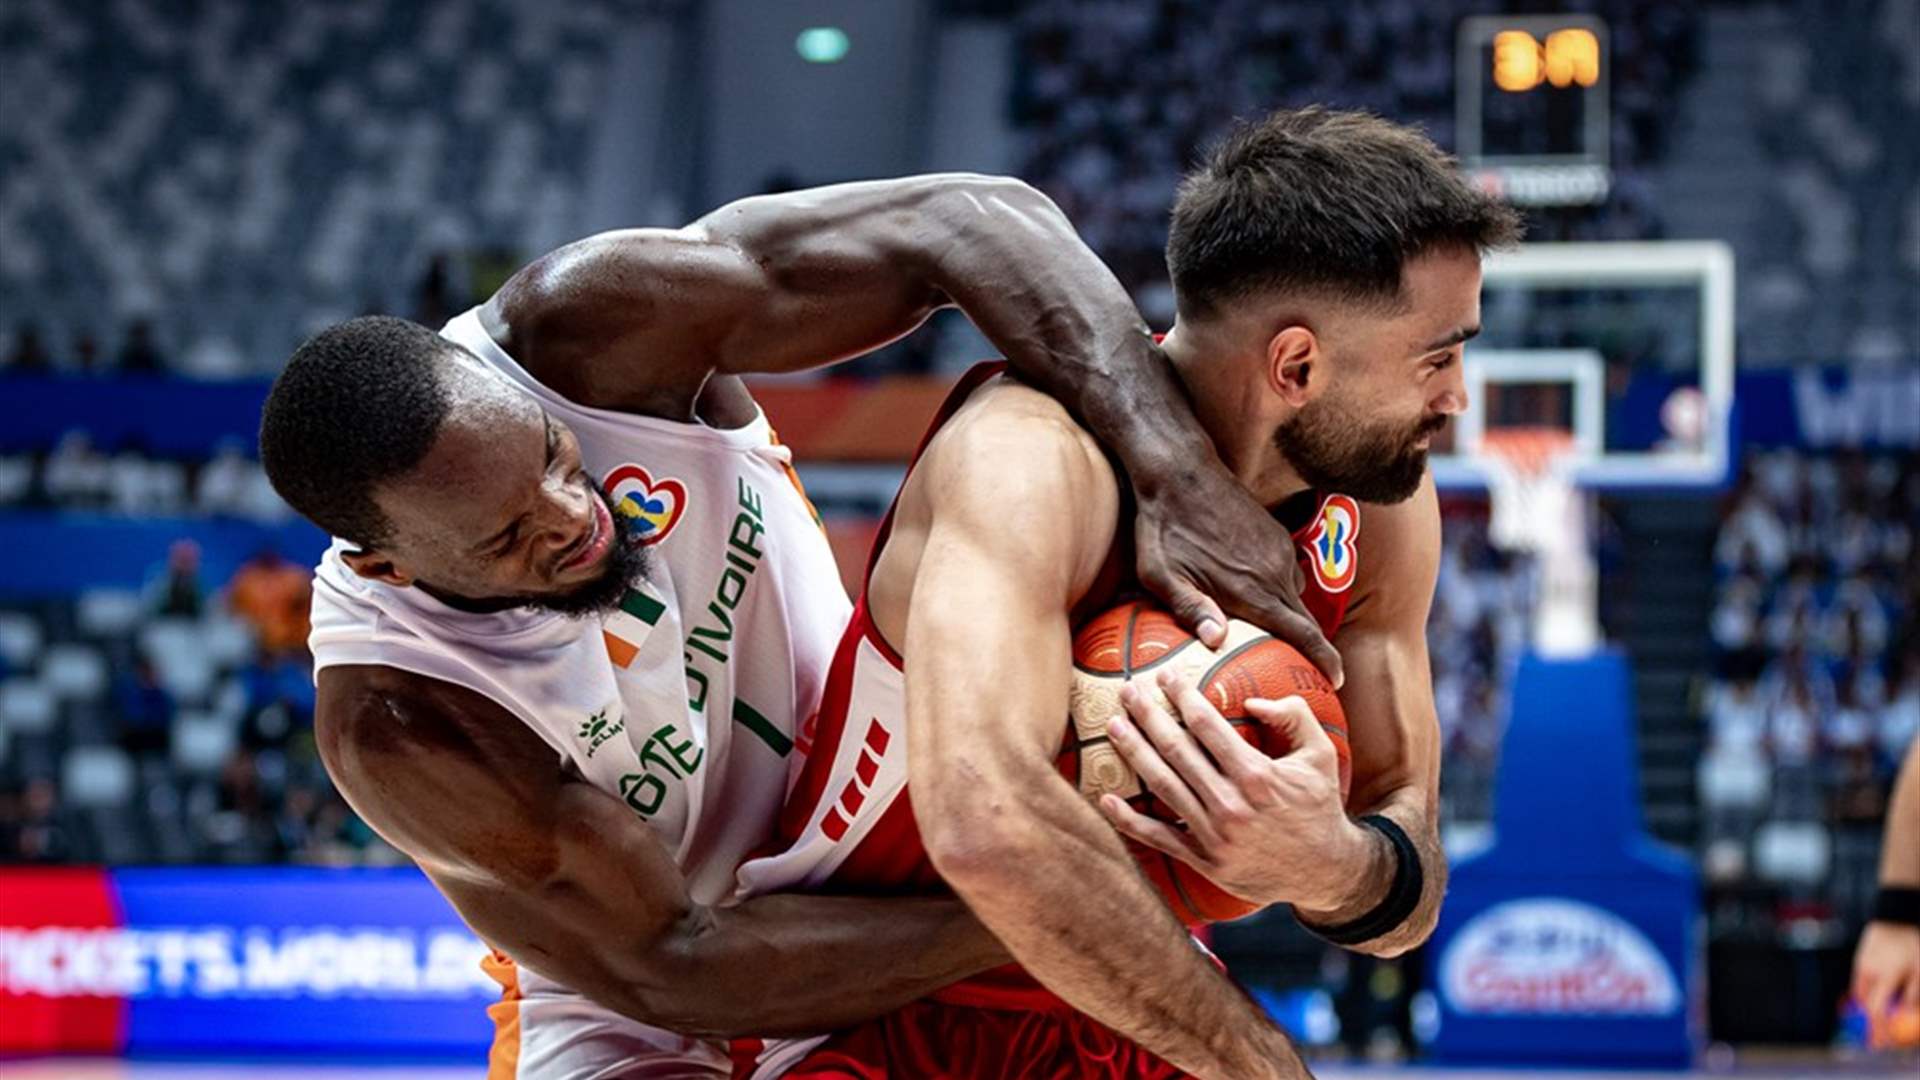 Q3 Update: Lebanon maintains lead over C&ocirc;te d&#39;Ivoire 73-66! Final quarter ahead. Tune in on LBCGroup.tv or LB2.